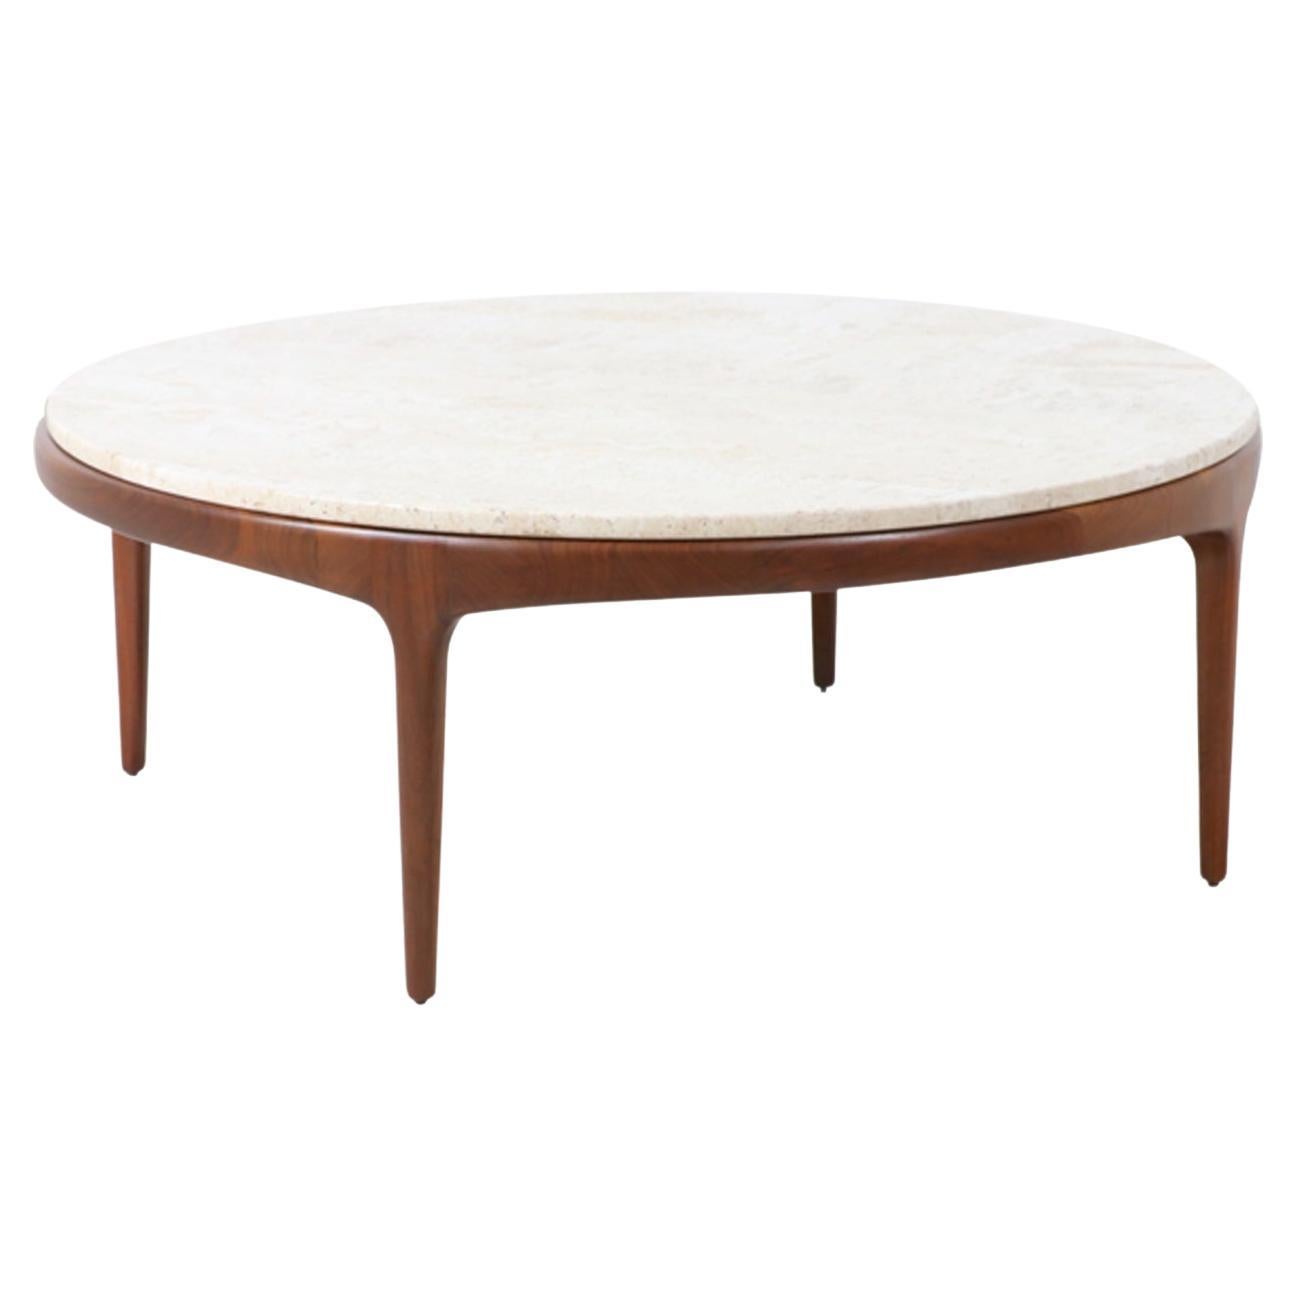 Mid-Century Modern “Rythm” Coffee Table with Travertine Stone Top by Lane